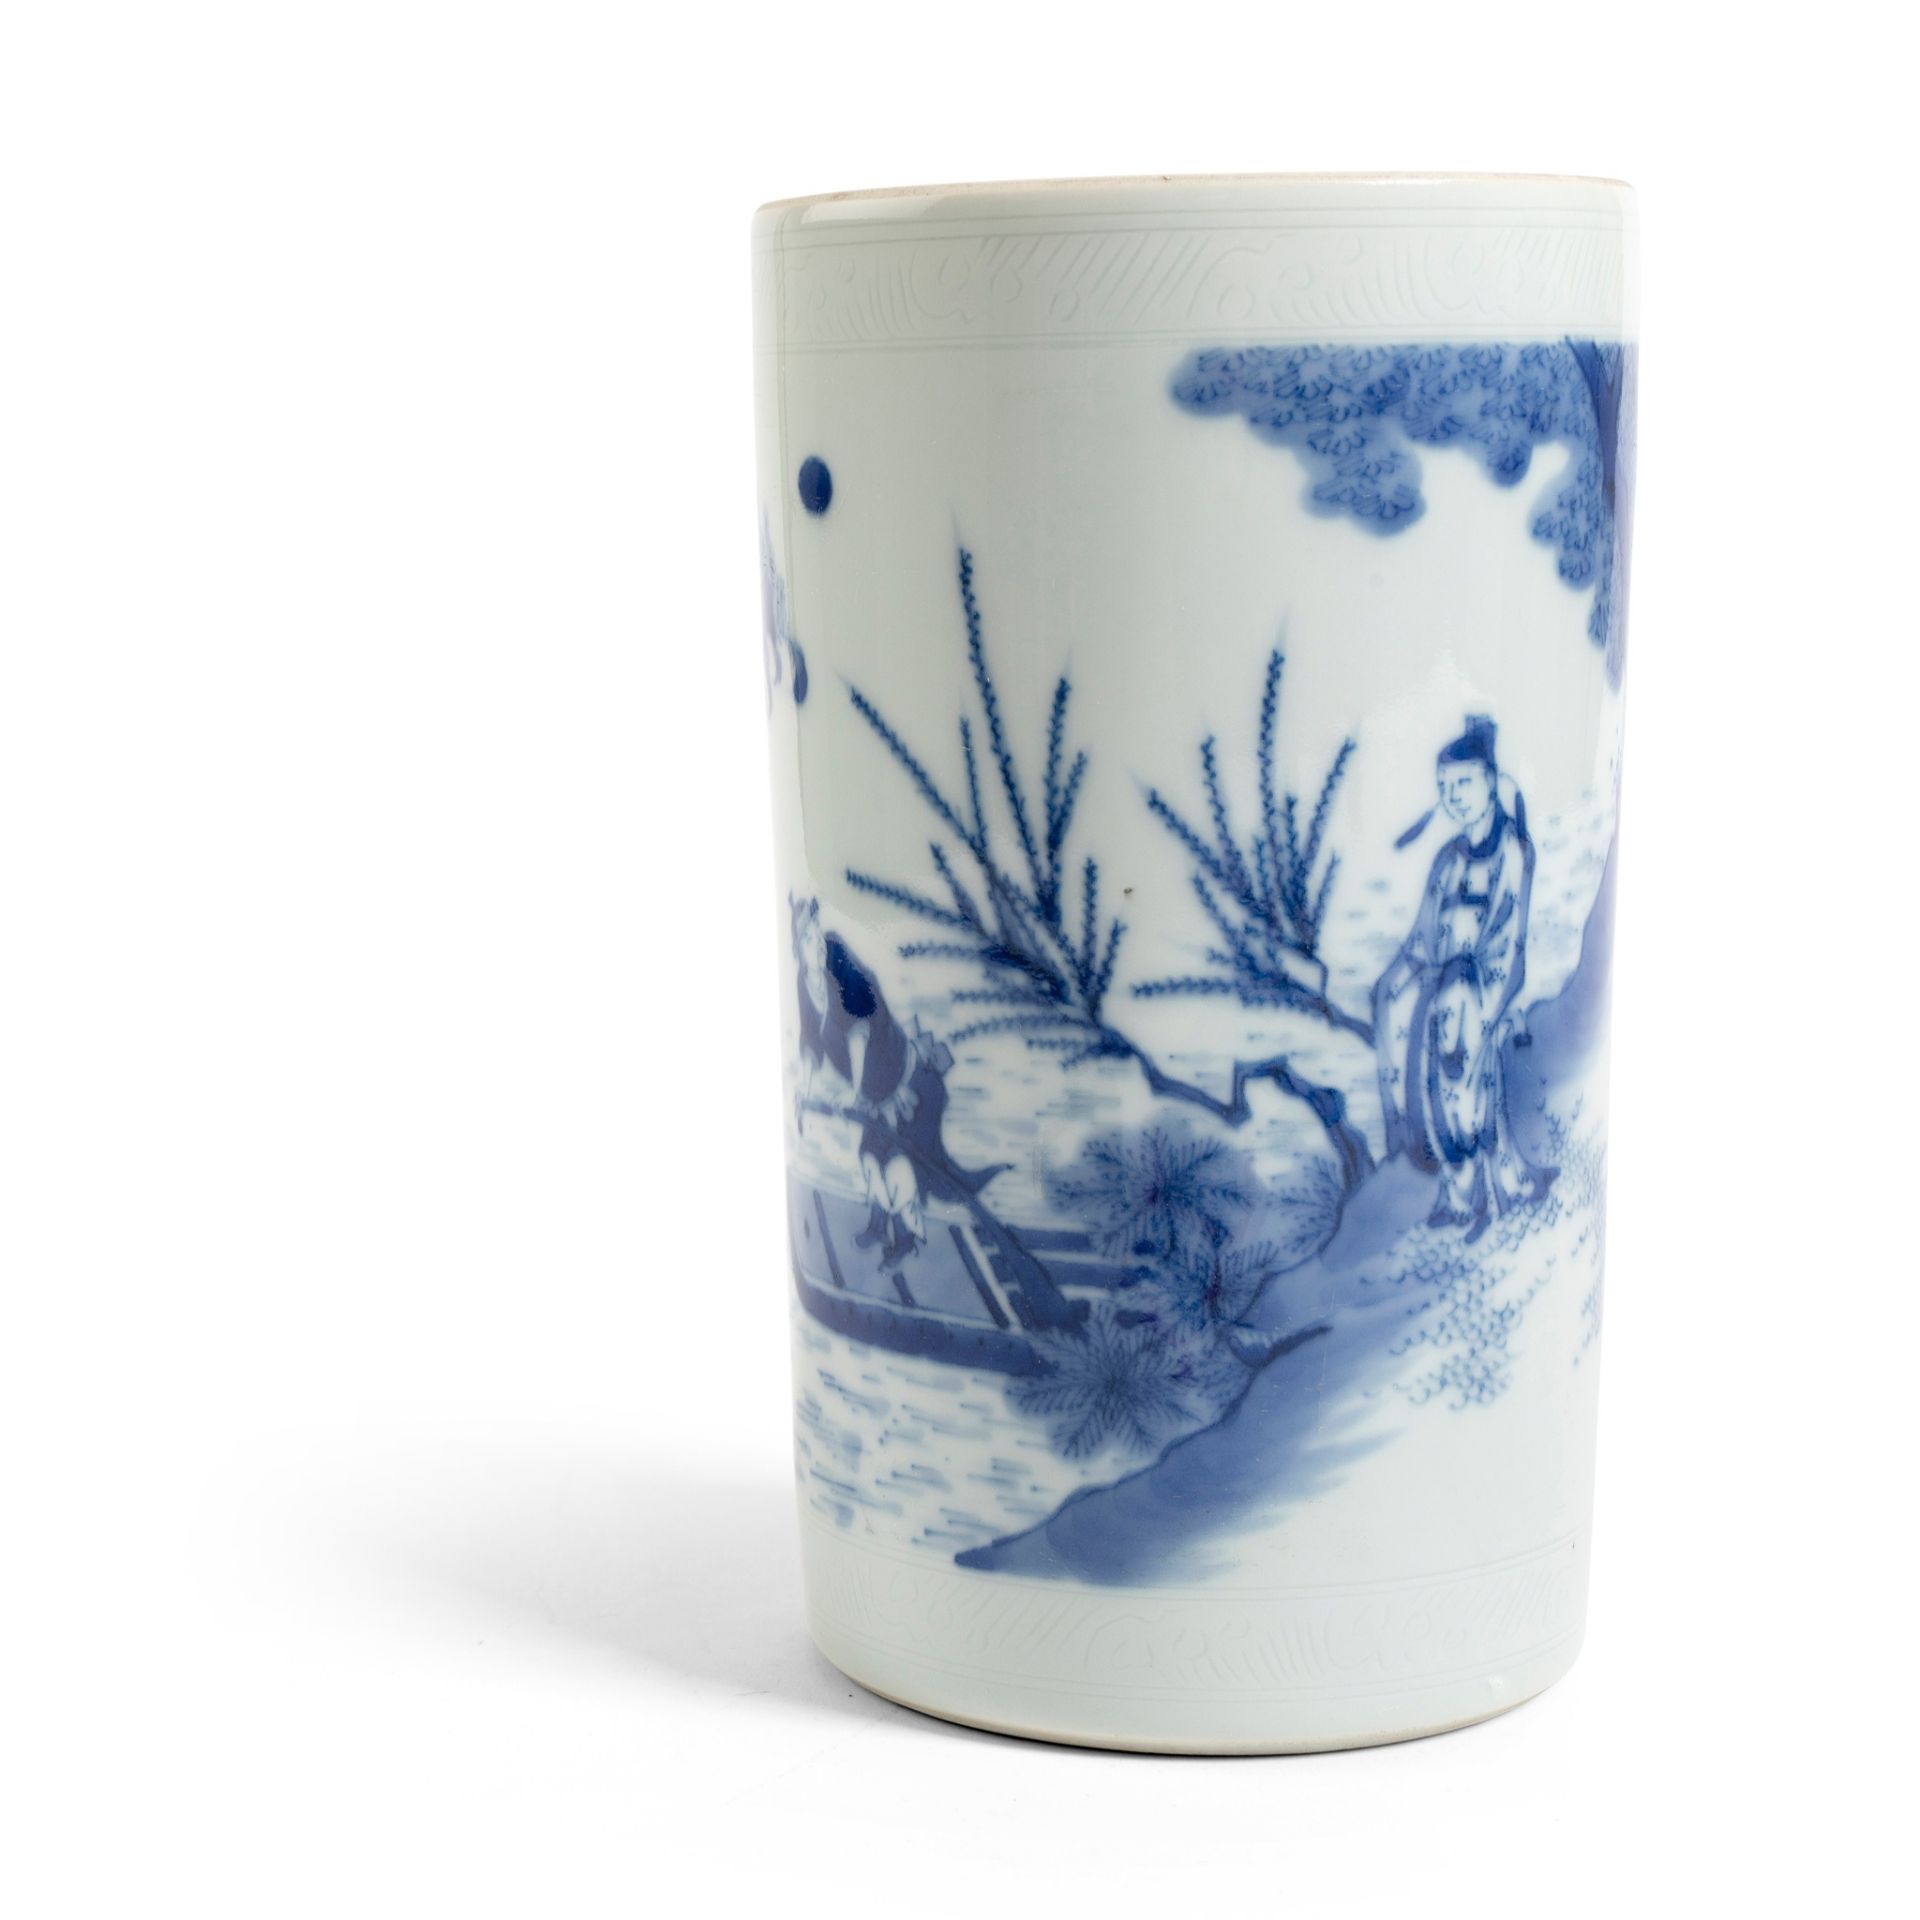 BLUE AND WHITE BRUSH POT QING DYNASTY, 19TH CENTURY